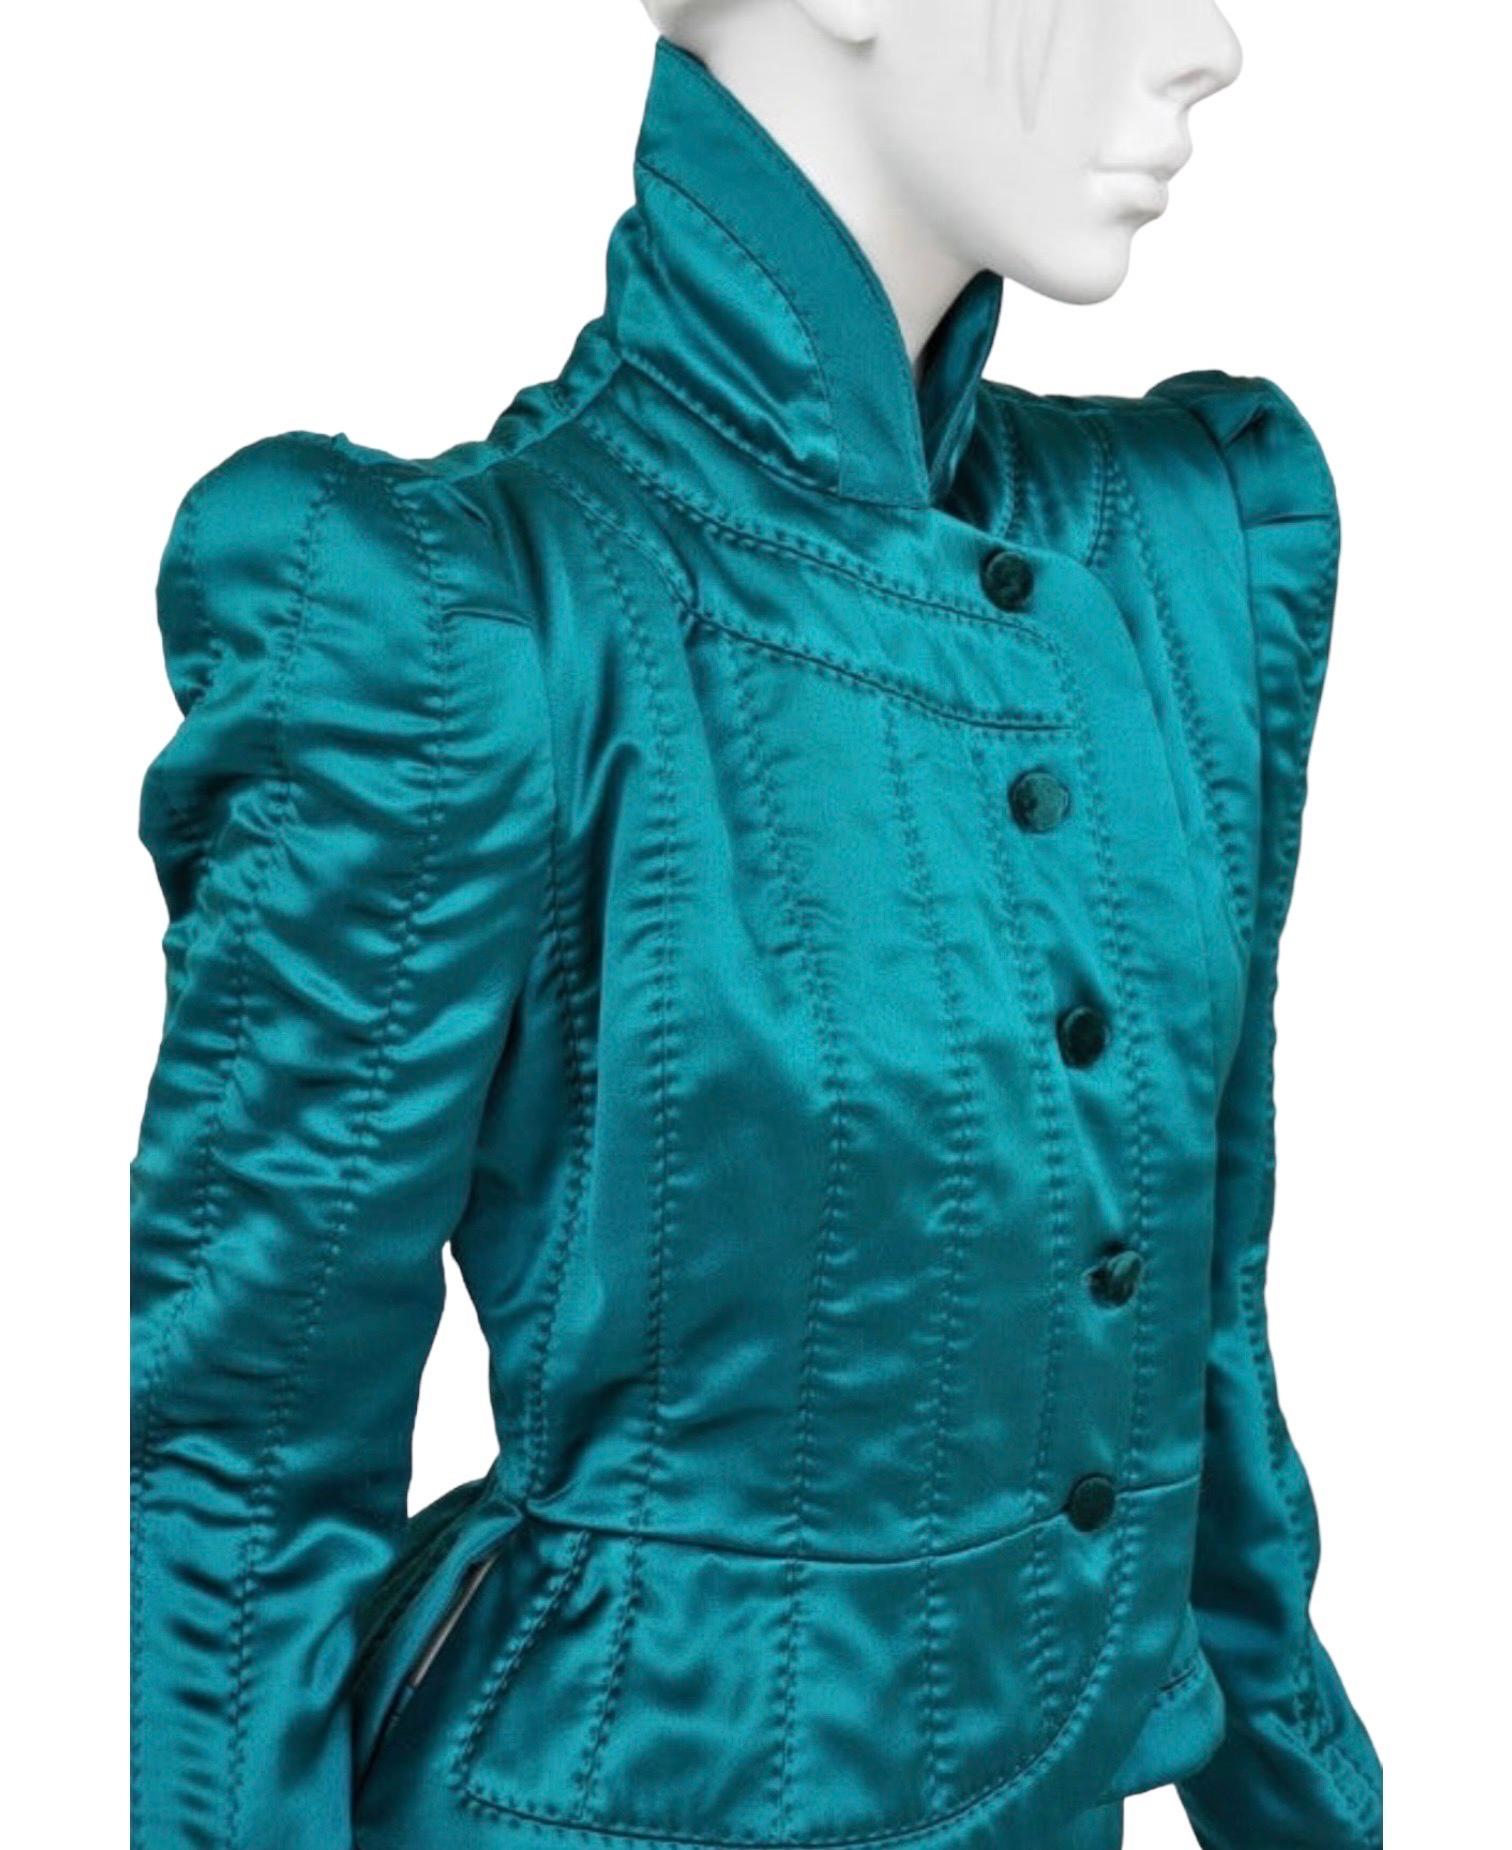 Women's F/W 2004 Vintage Tom Ford for Yves Saint Laurent Emerald Green Silk Pagoda Suit 